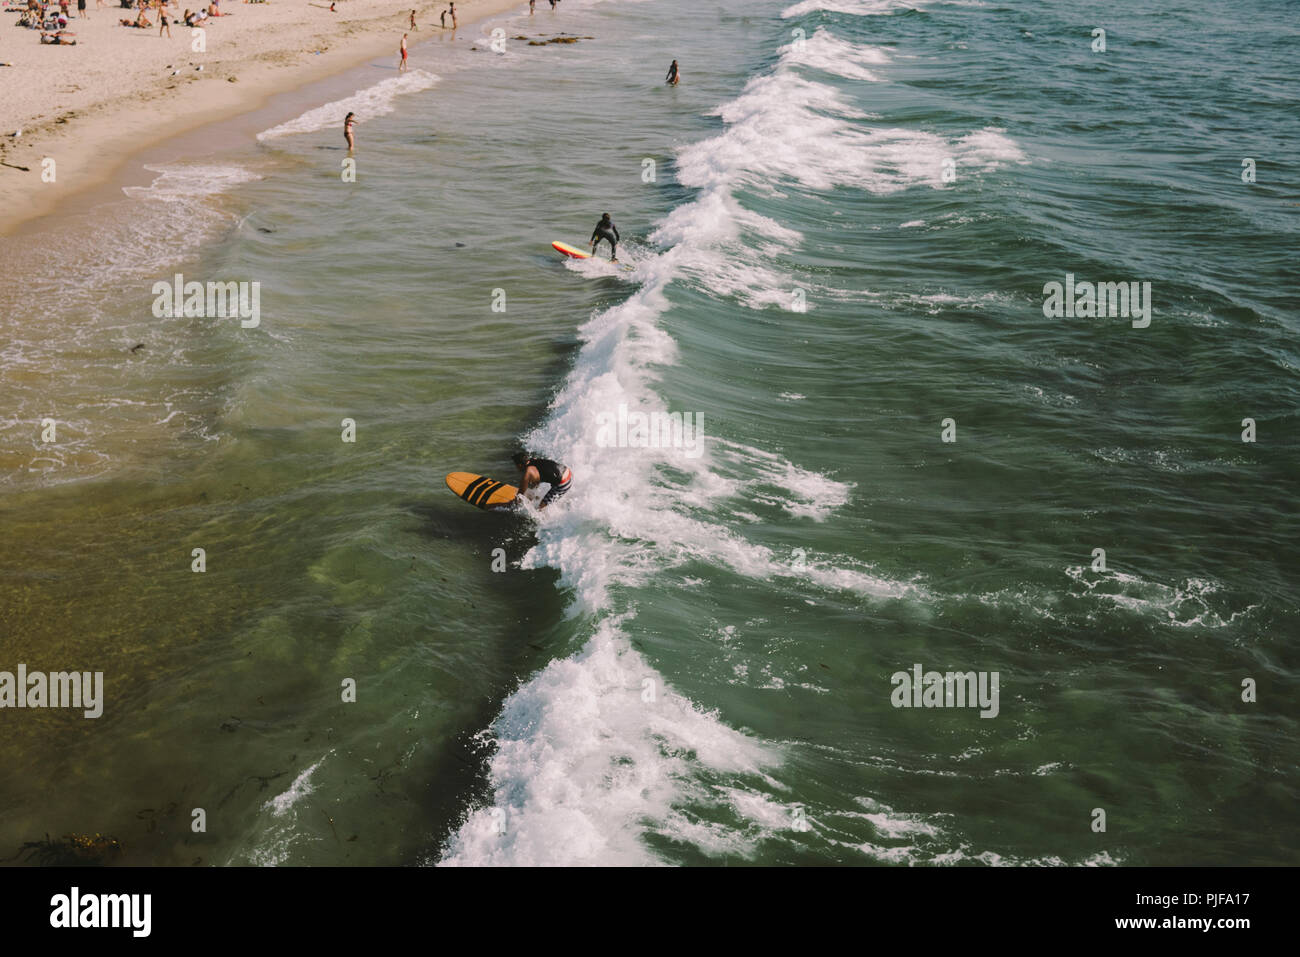 High view of surfers and swimmers in the ocean on a sunny day Stock Photo